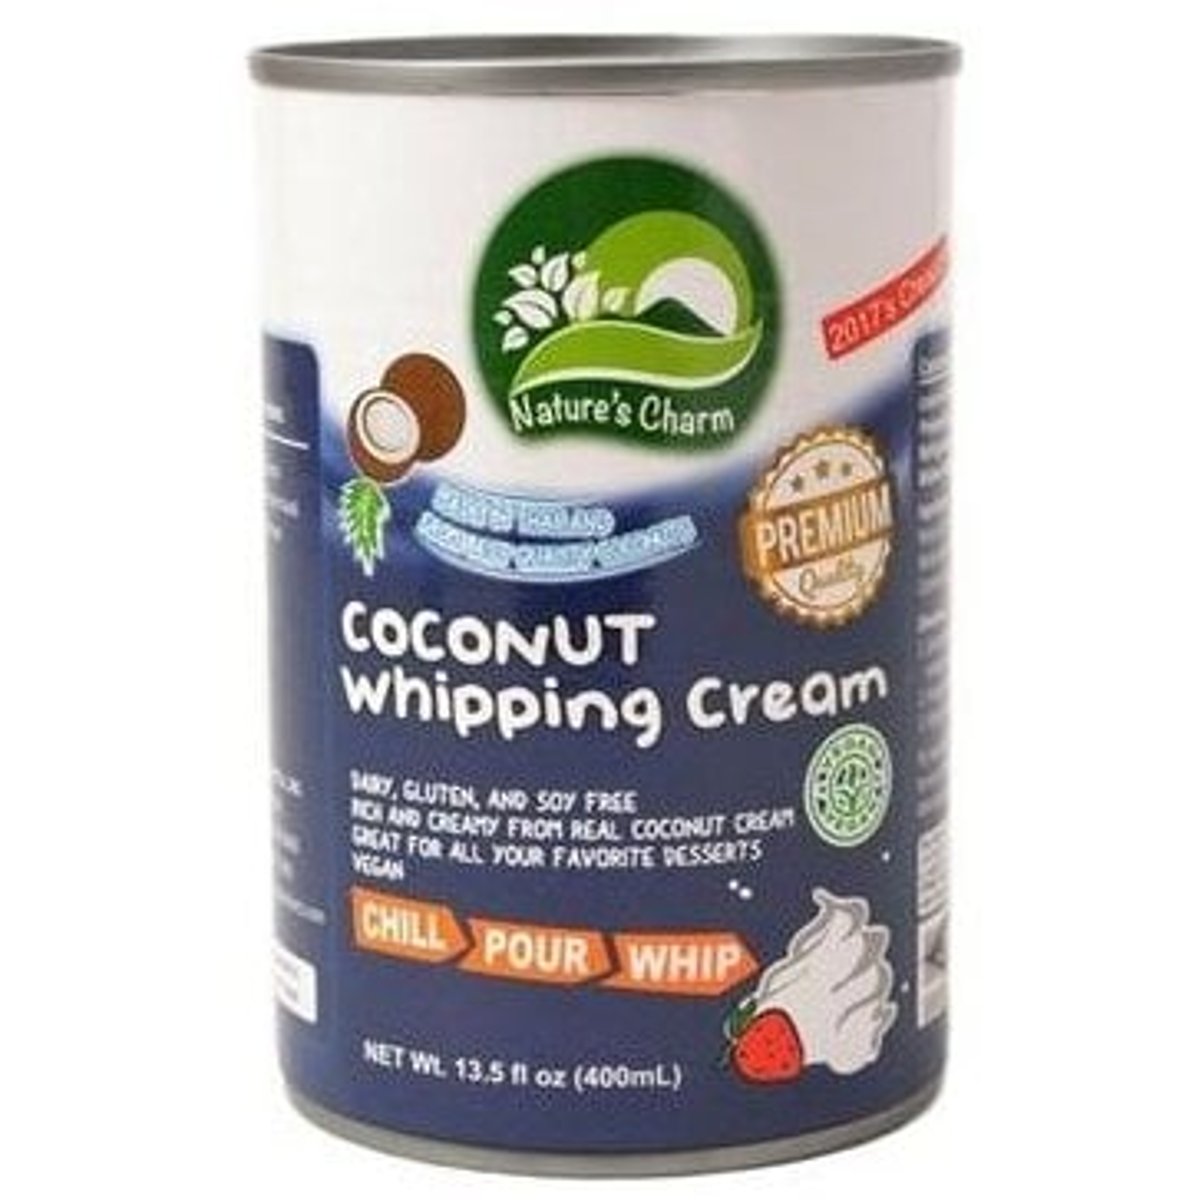 Nature's Charm Coconut whipping cream